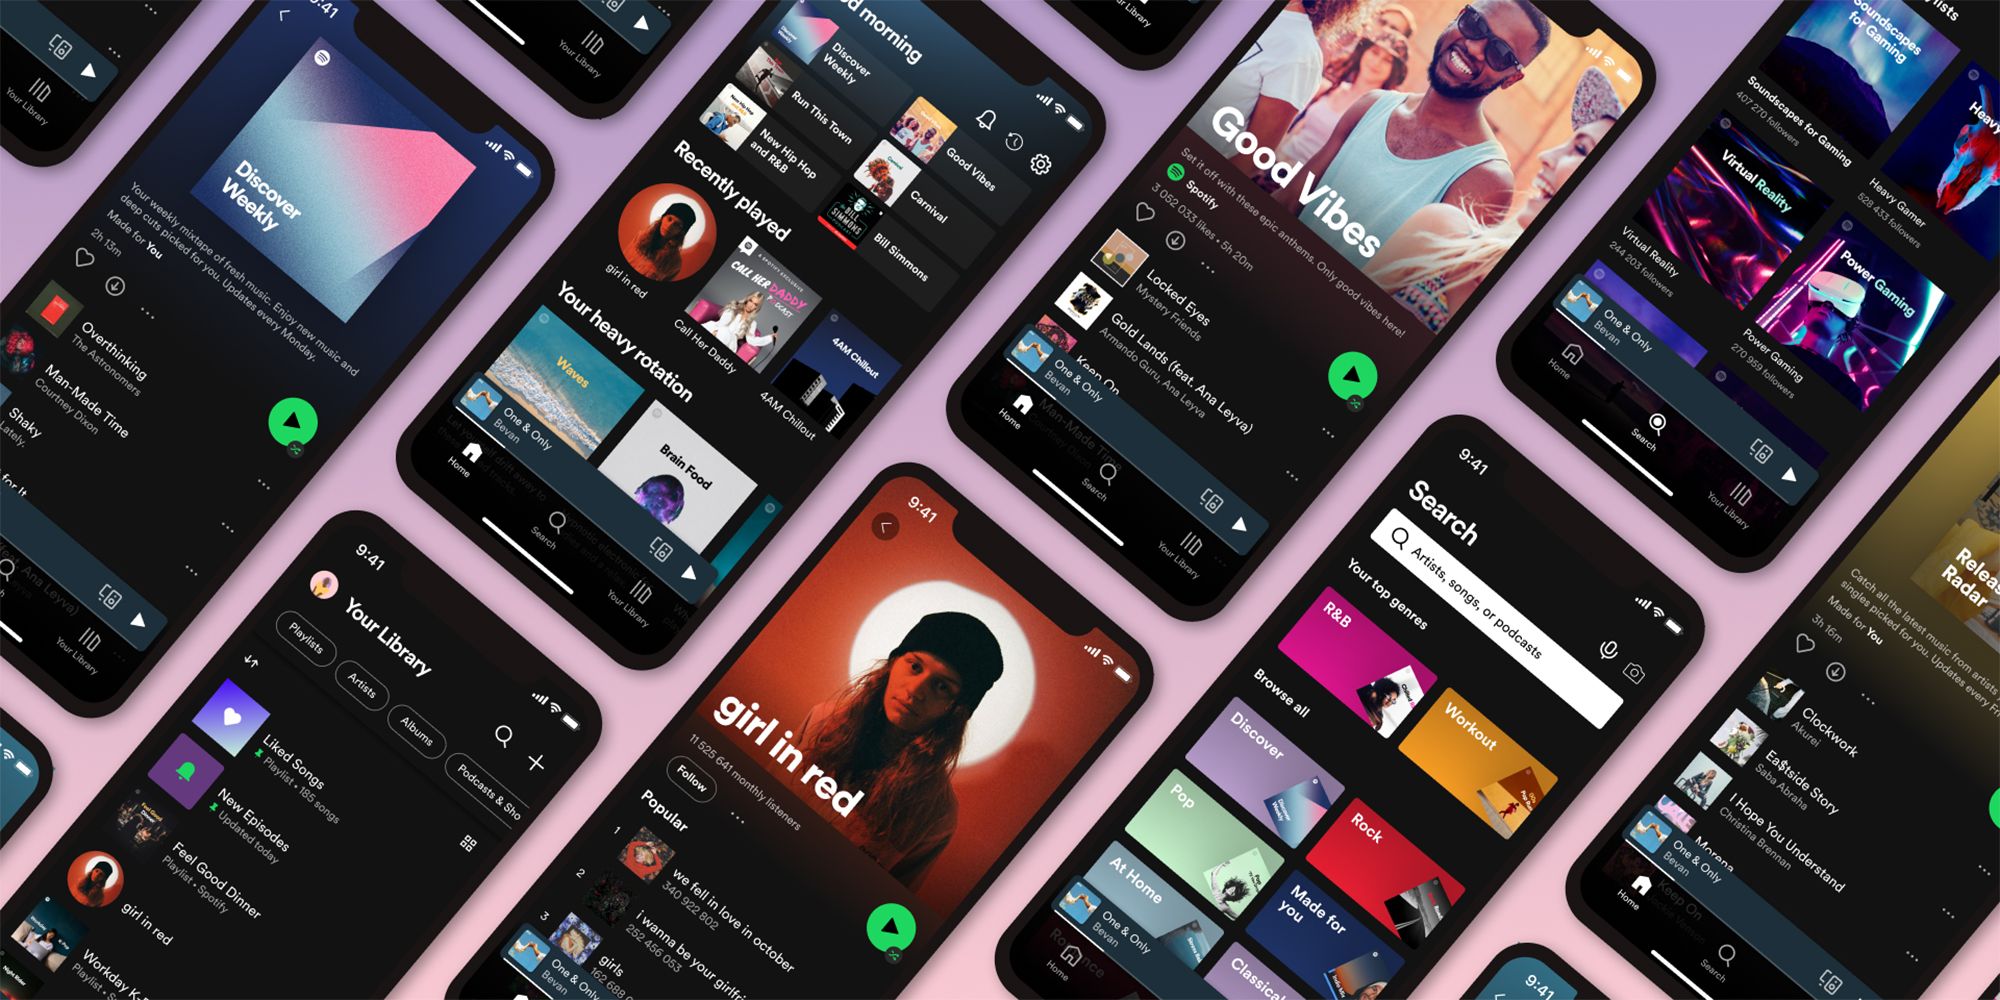 Different Spotify app images on iPhones